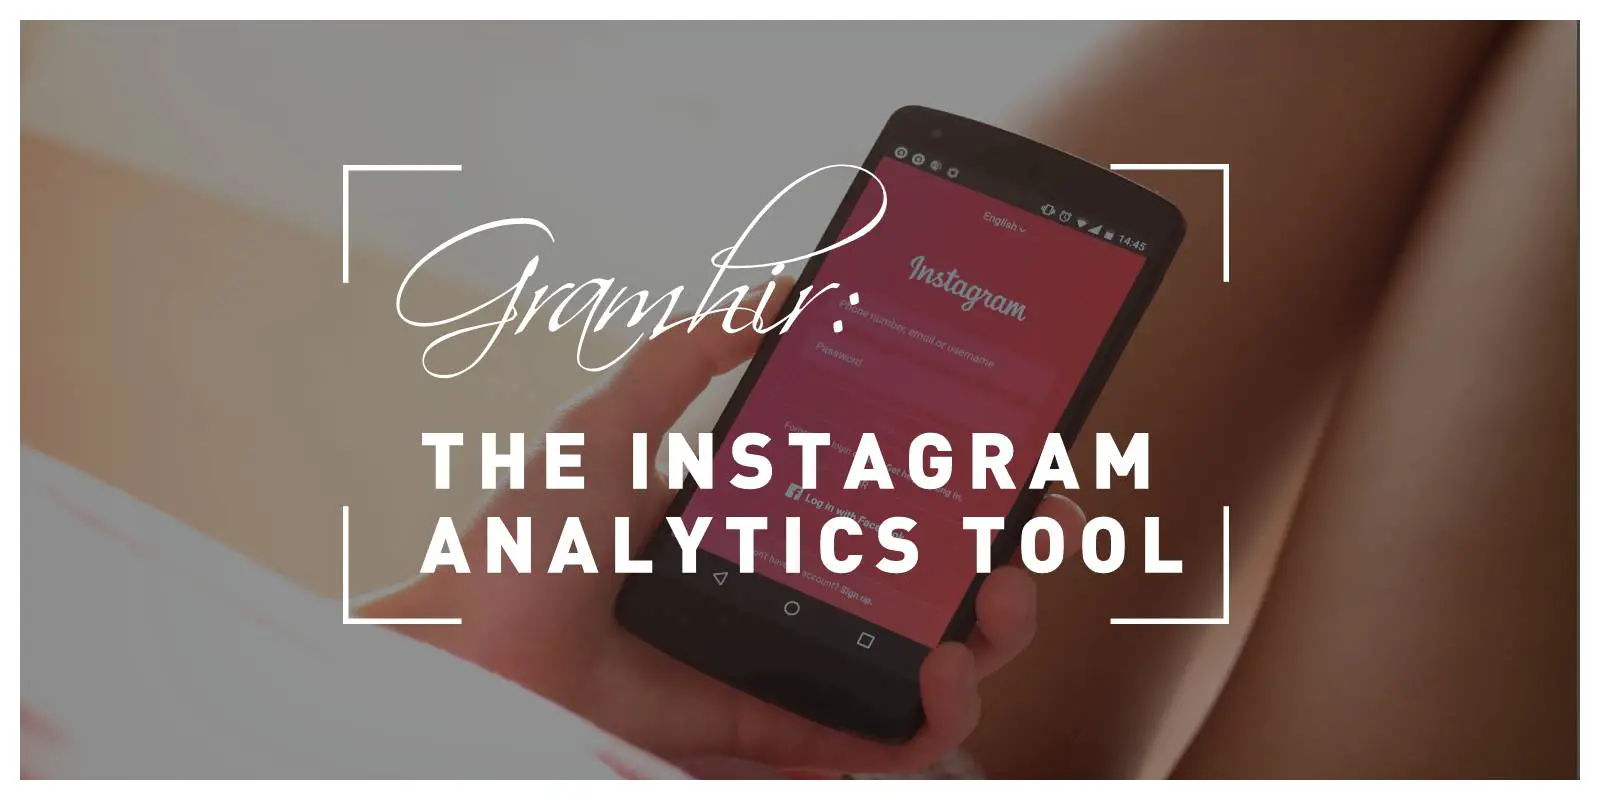 gramhir the instagram analytics tool you need to know